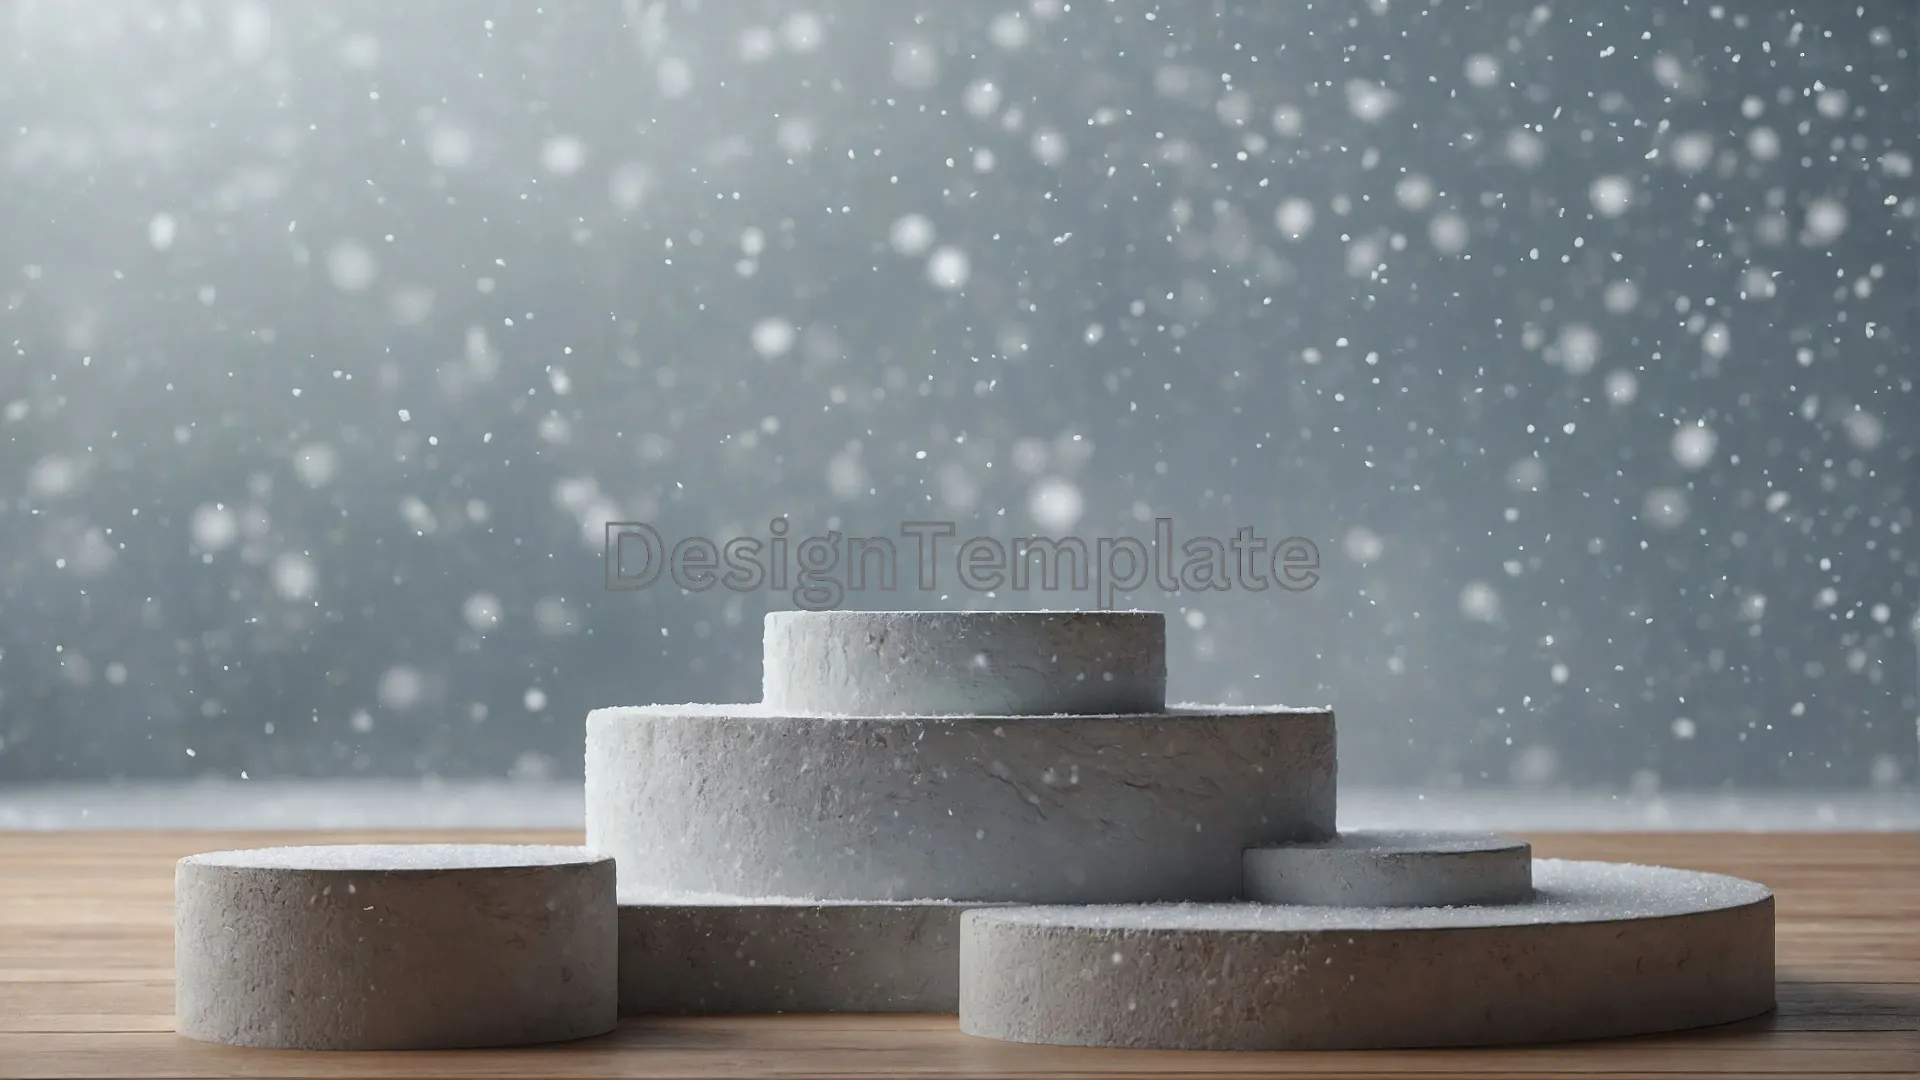 Snow Circles Image Gentle Snowfall Background image